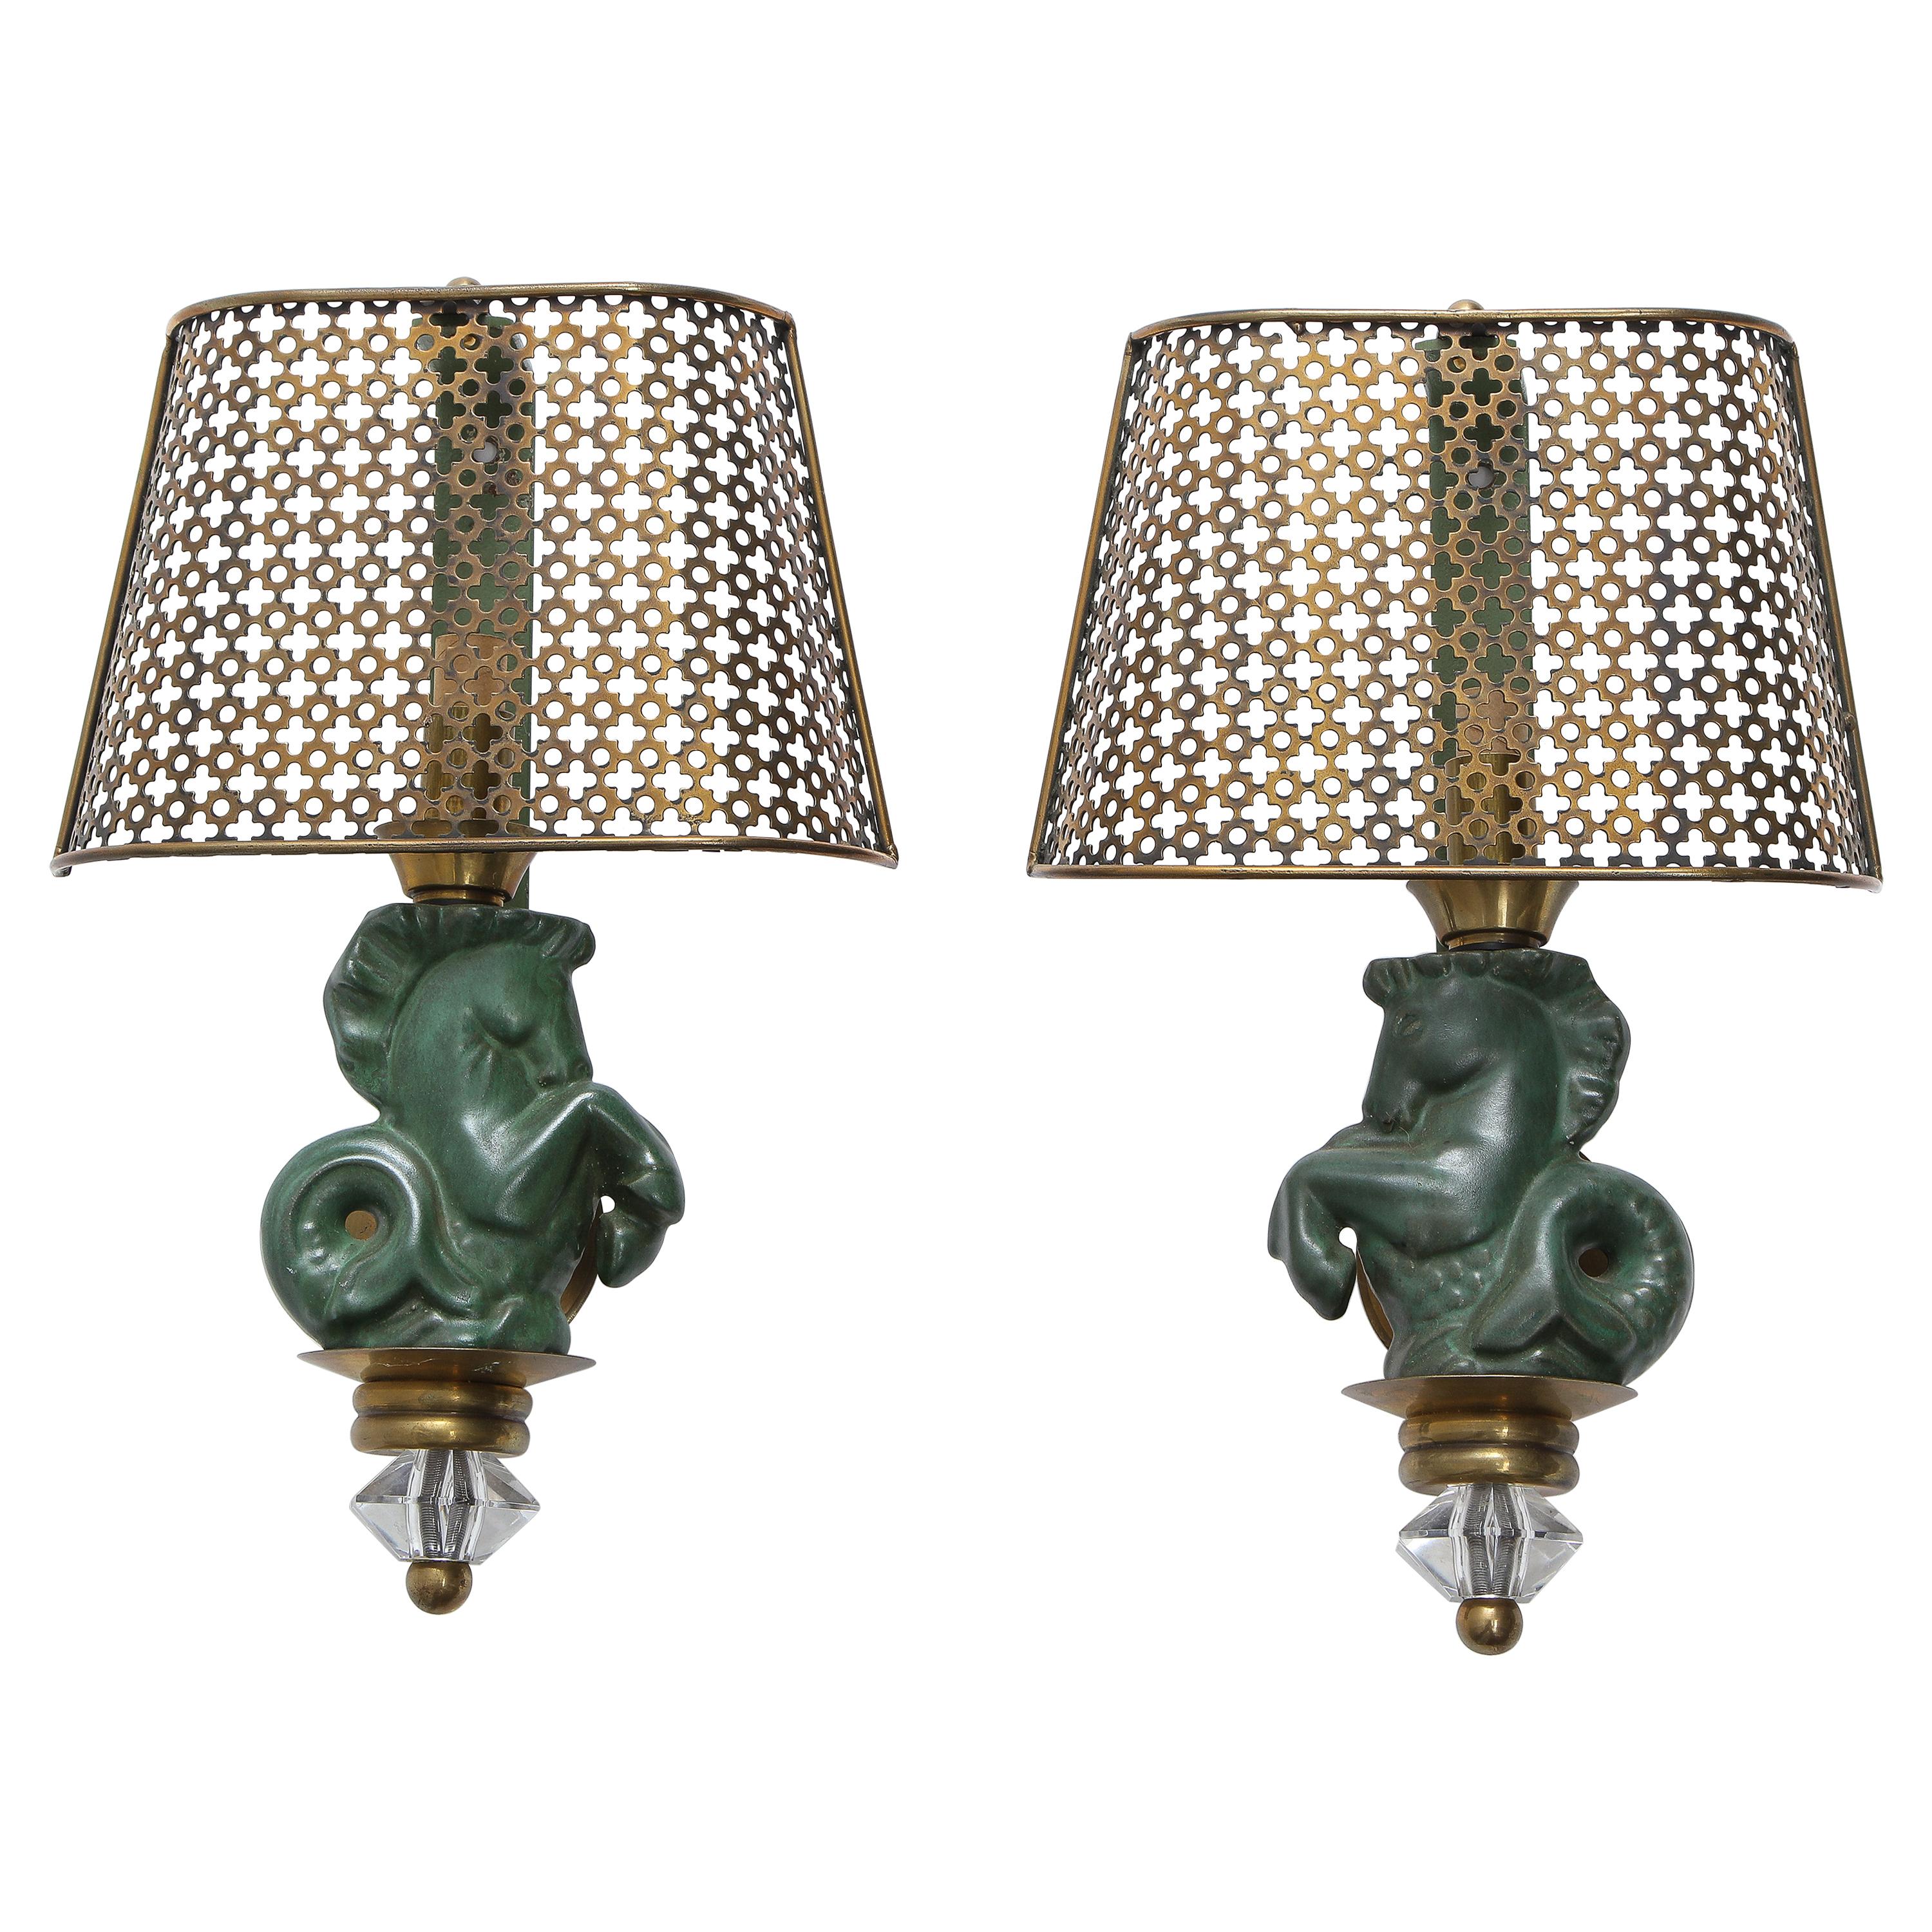 Pair of Seahorse Sconces in Ceramic and Brass by Hasselbur, France, 1960